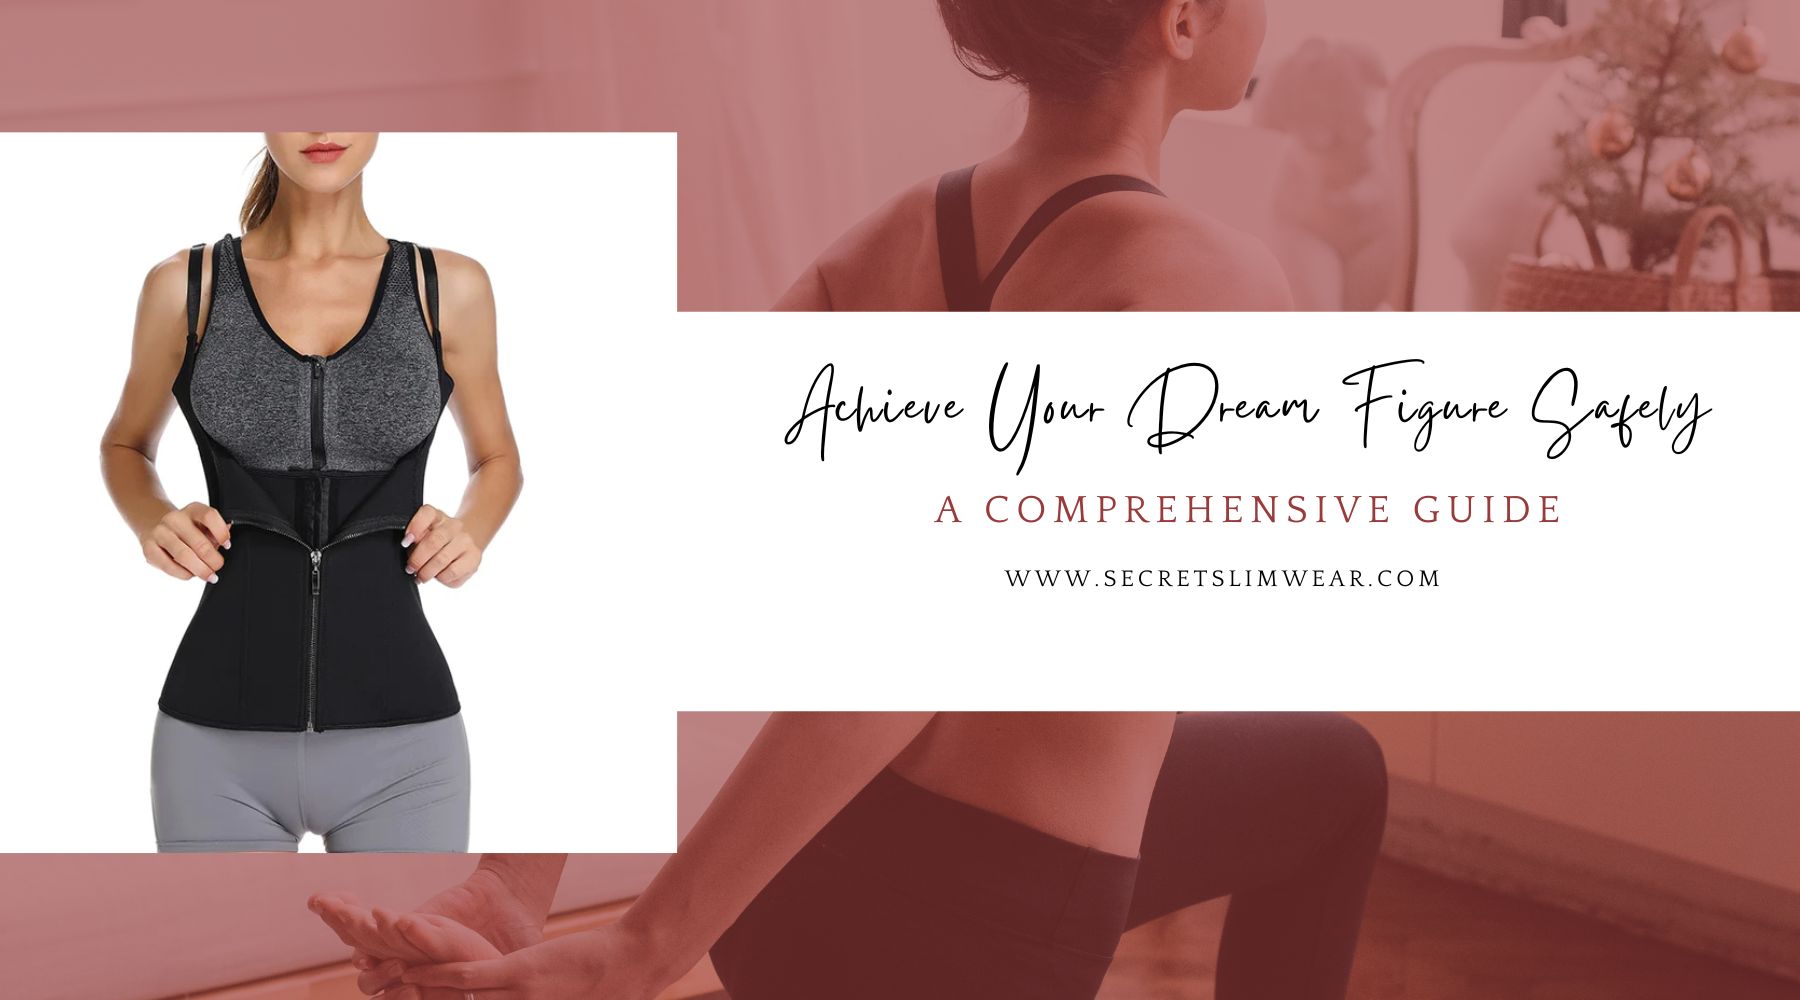 The Ultimate Guide to Waist Training: How to Achieve Your Dream Figure Safely"